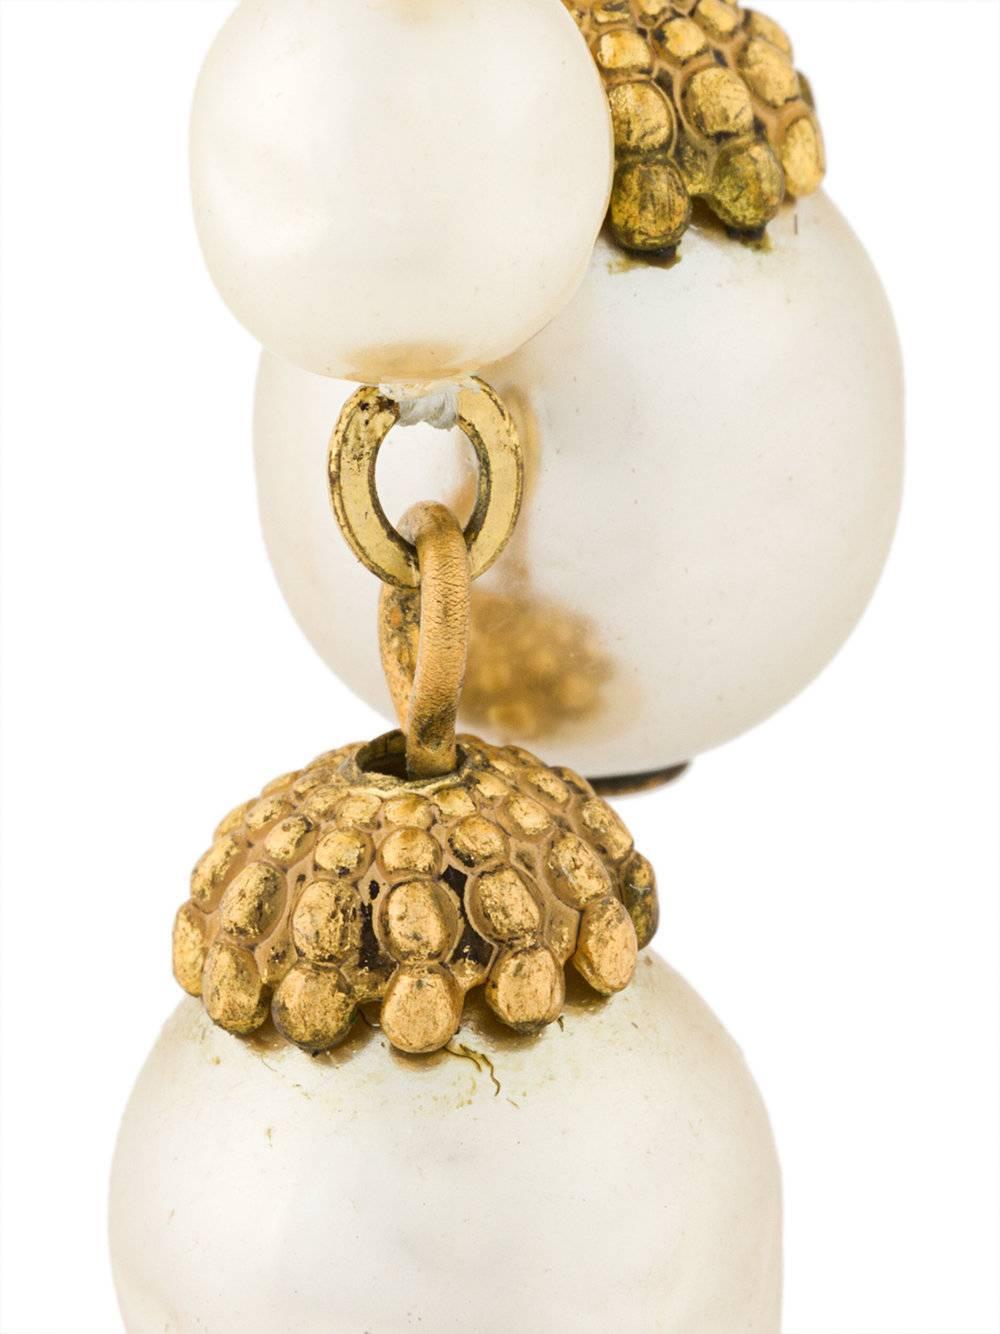 In baroque style, these vintage clip-on earrings are adorned with faux pearls in a drop silhouette.

Colour: Gold, ivory

Material: Plastic

Measurements: Length: 6cm

Condition: 8/10

This item has been gently used. 